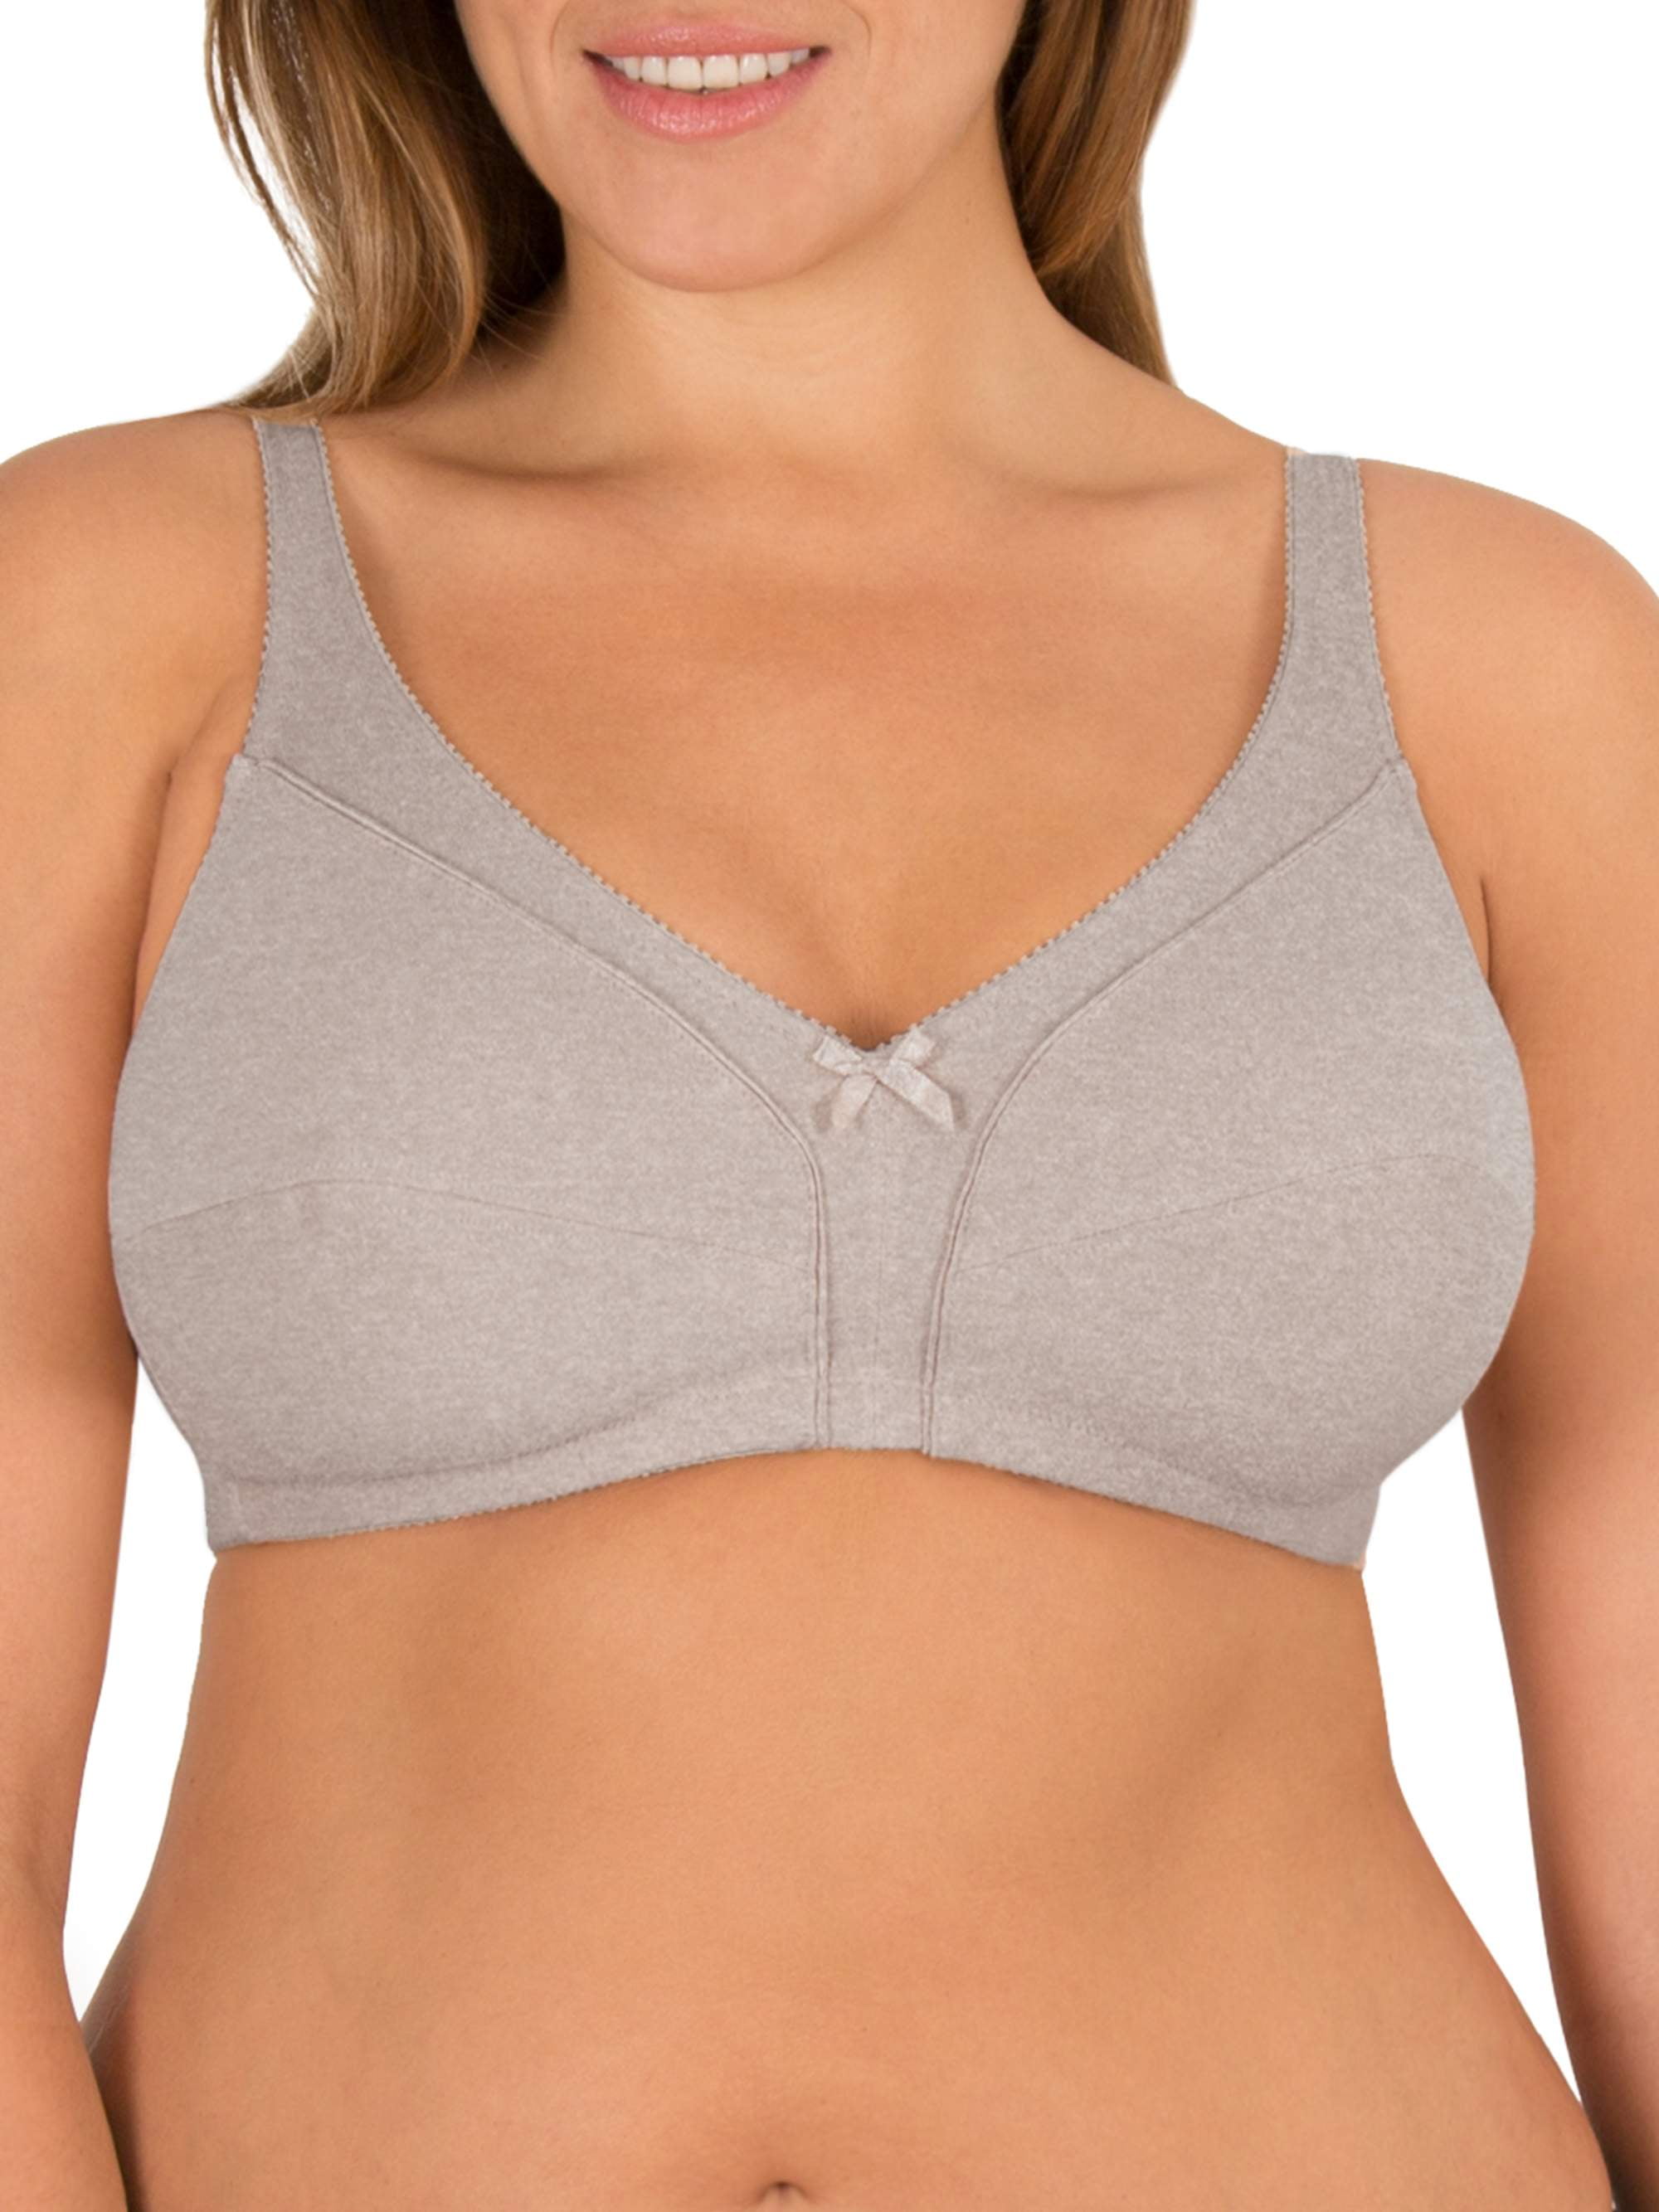  Fruit Of The Loom Womens Seamed Soft Cup Wirefree Cotton Bra